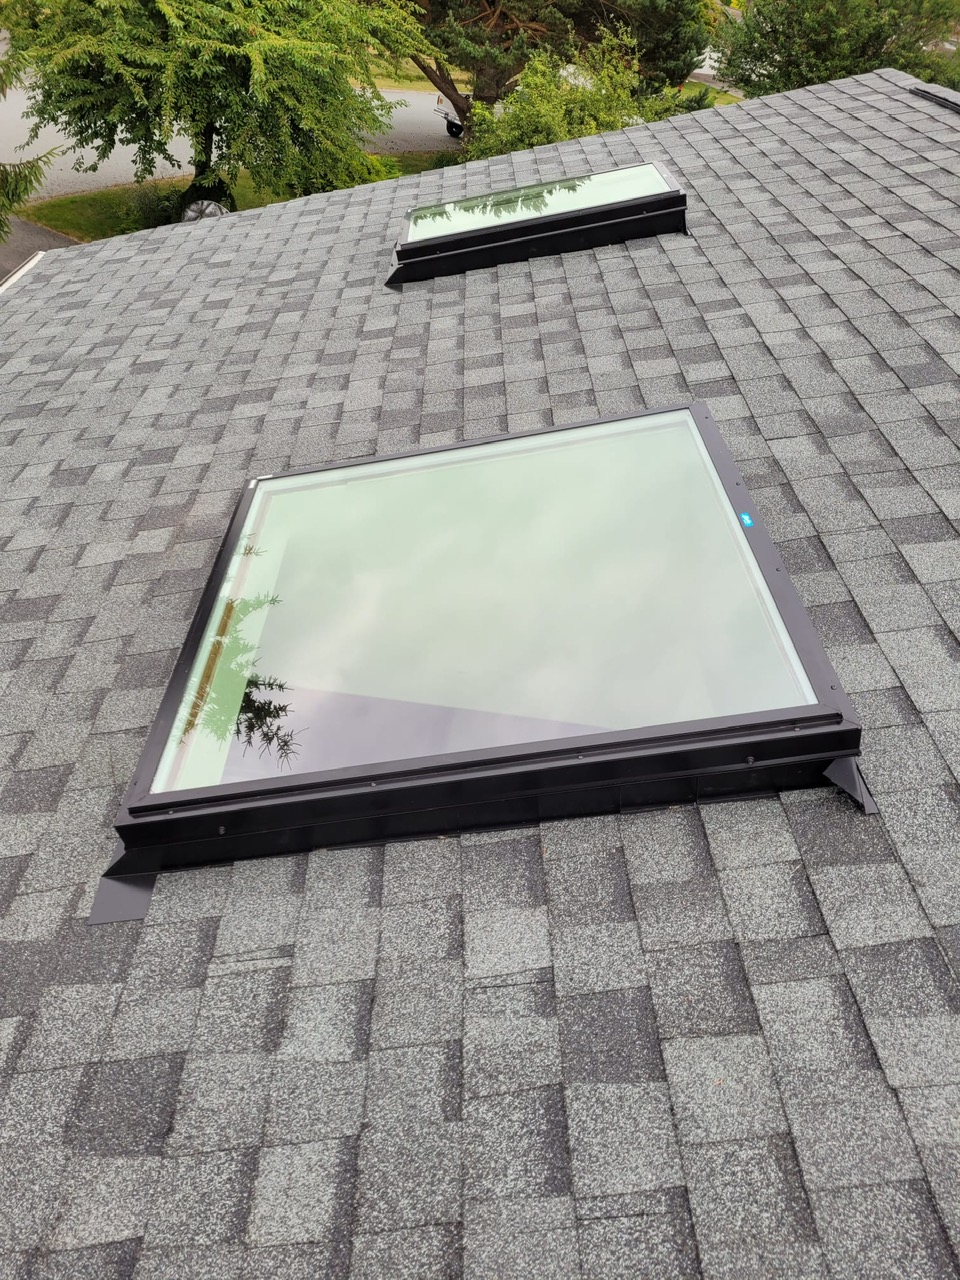 New roof and skylights in Squamish BC by BQR